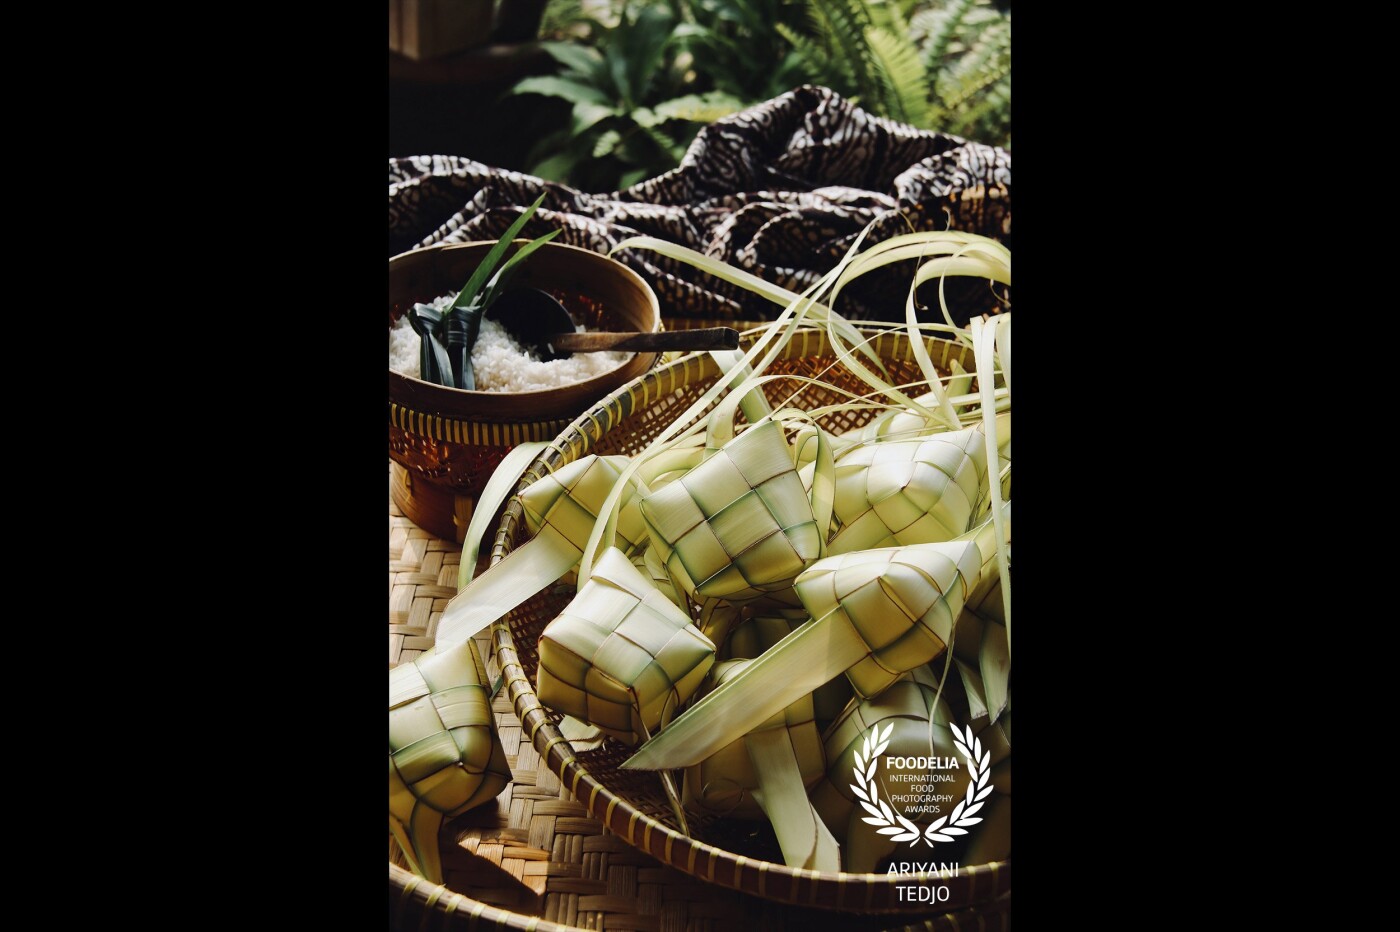 Ketupat, one of several kinds of Indonesian rice cakes which is cooked in diamond-shaped casing made of woven coconut palm leaves. This particular rice cake is popular throughout Java, Bali and also in West Sumatra. Its popularity is increased during the Eid celebrations (with the exception of Bali as majority of Balinese does not celebrate Eid).<br />
Here in the image are dozens of ketupat casings ready to be filled with some rice and then cooked. All the props used in the image are traditional kitchen items used daily at home. The textile in the background is Indonesian Batik cloth.